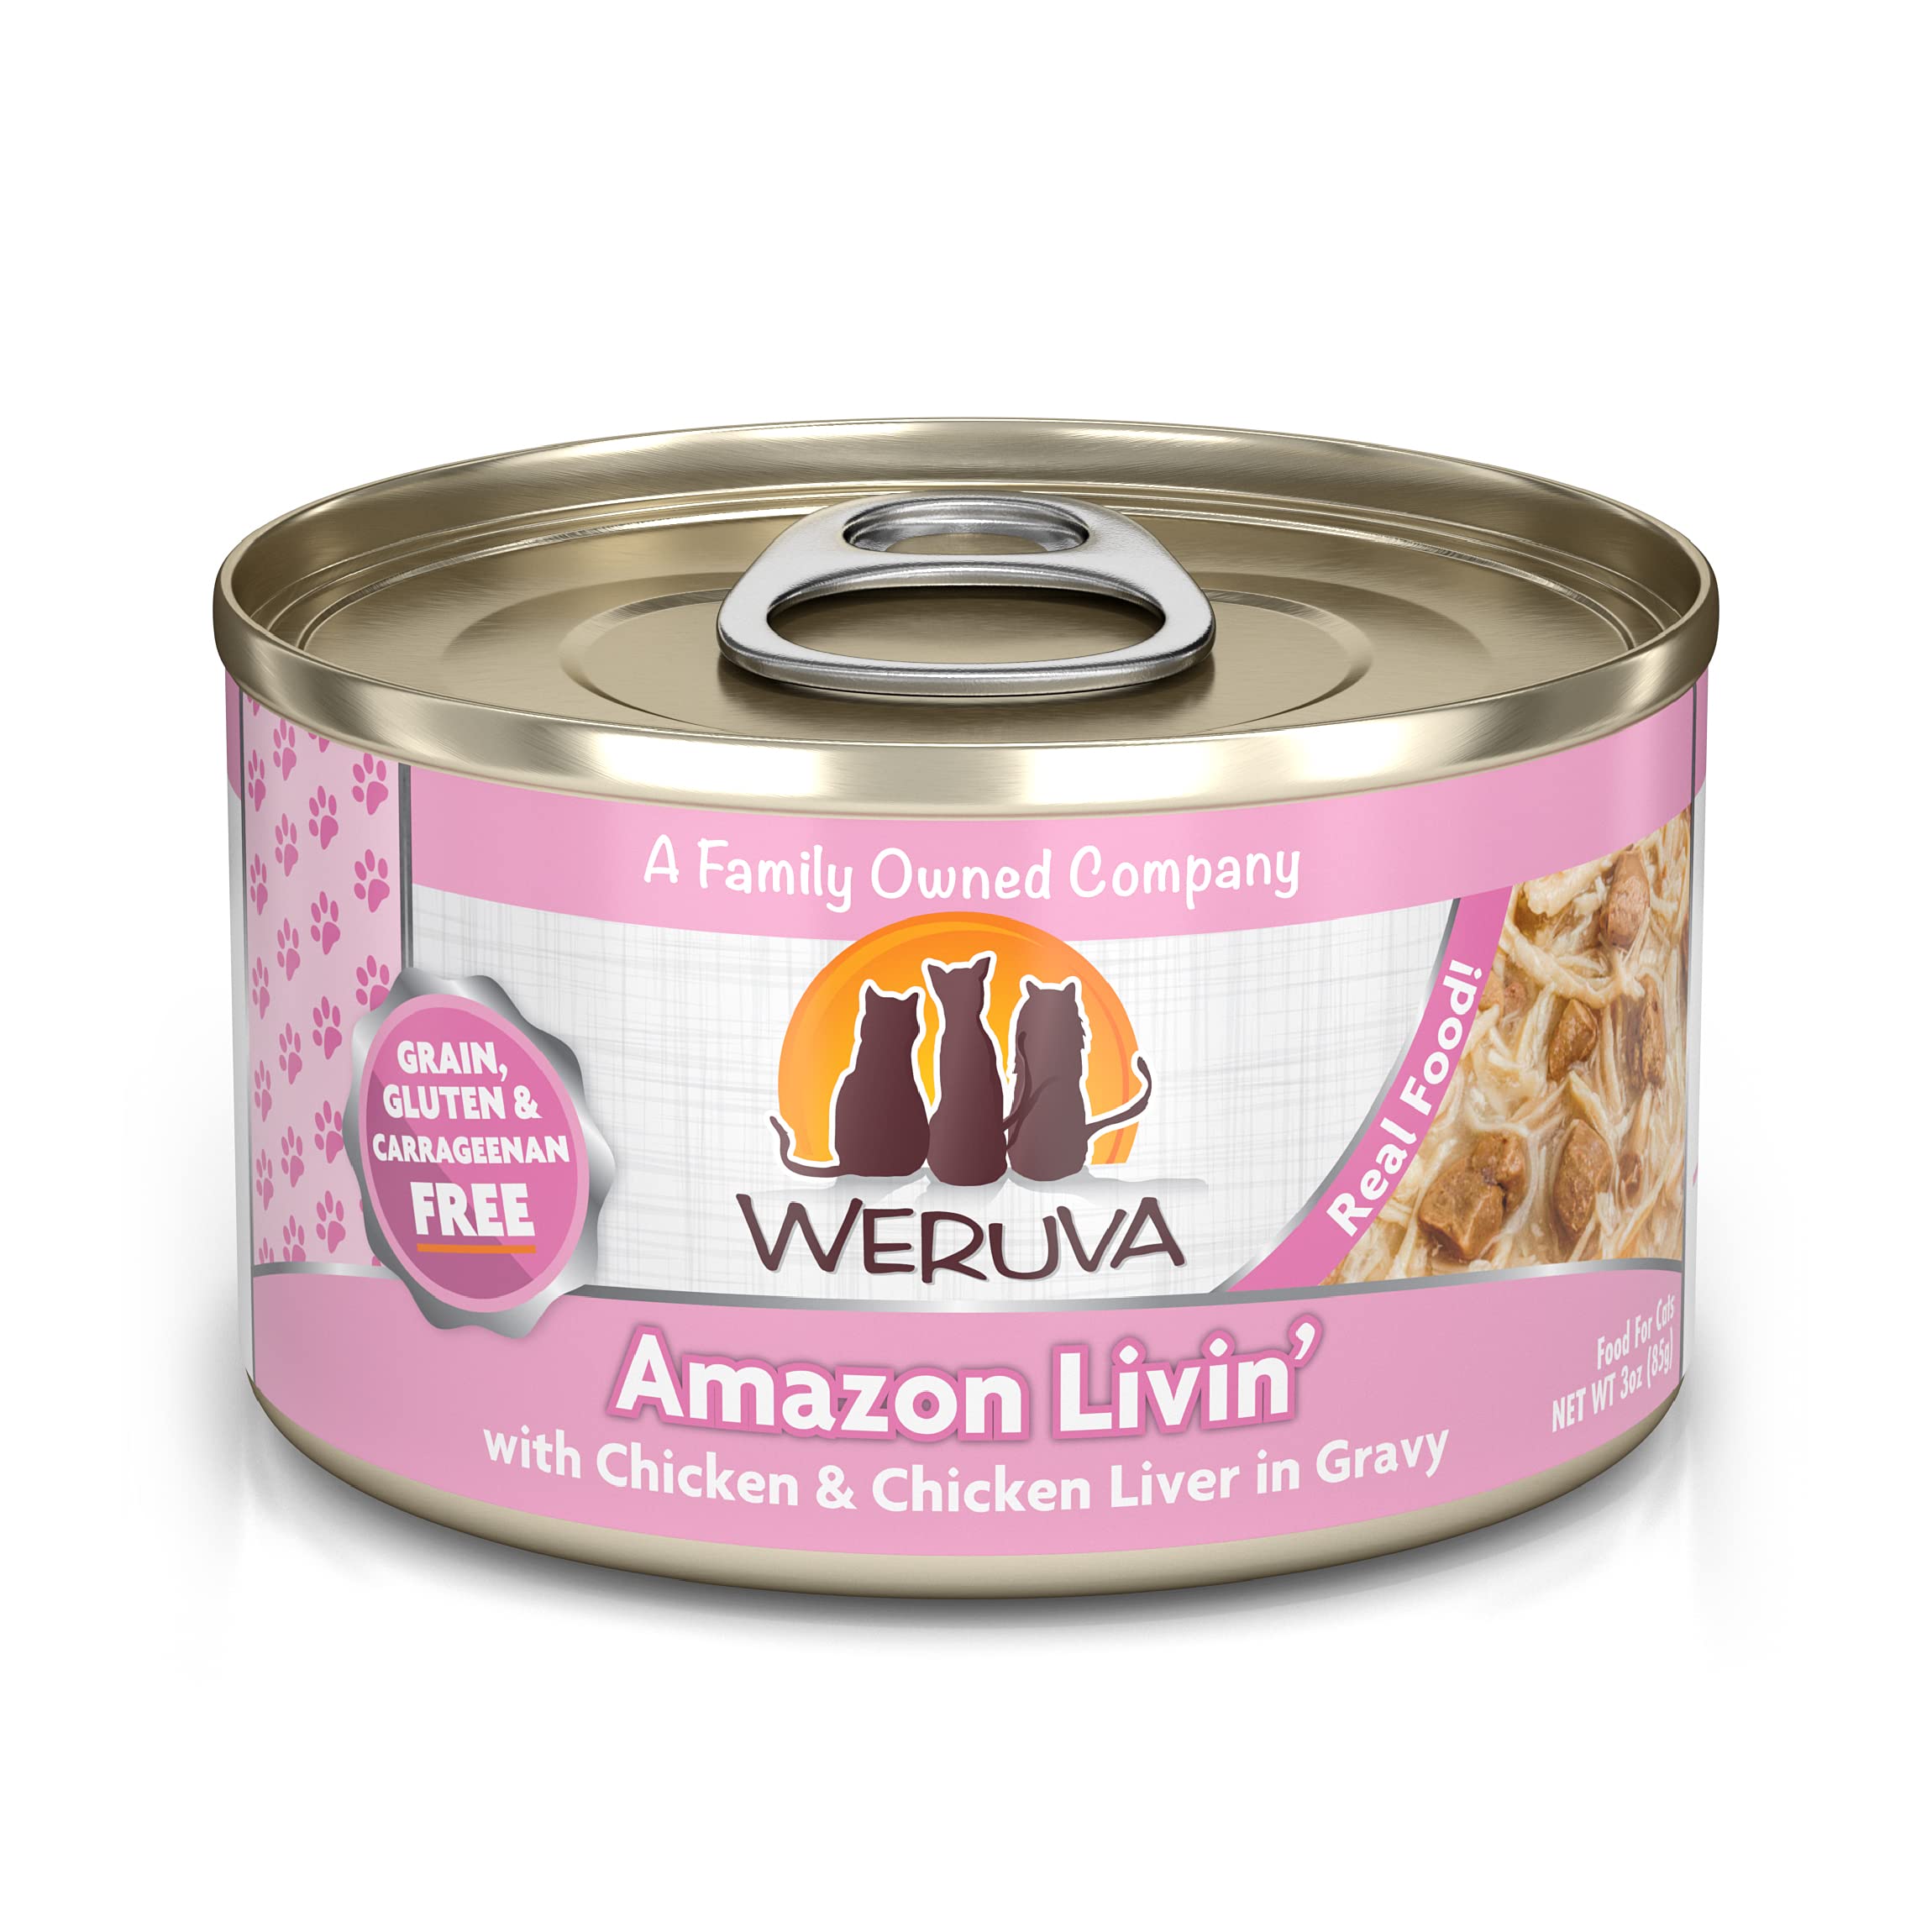 Book Cover Weruva Classic Cat Food, Nine Liver with Chicken Breast & Chicken Liver in Gravy, 3oz Can (Pack of 24) Amazon Livin' 3 Ounce (Pack of 24)